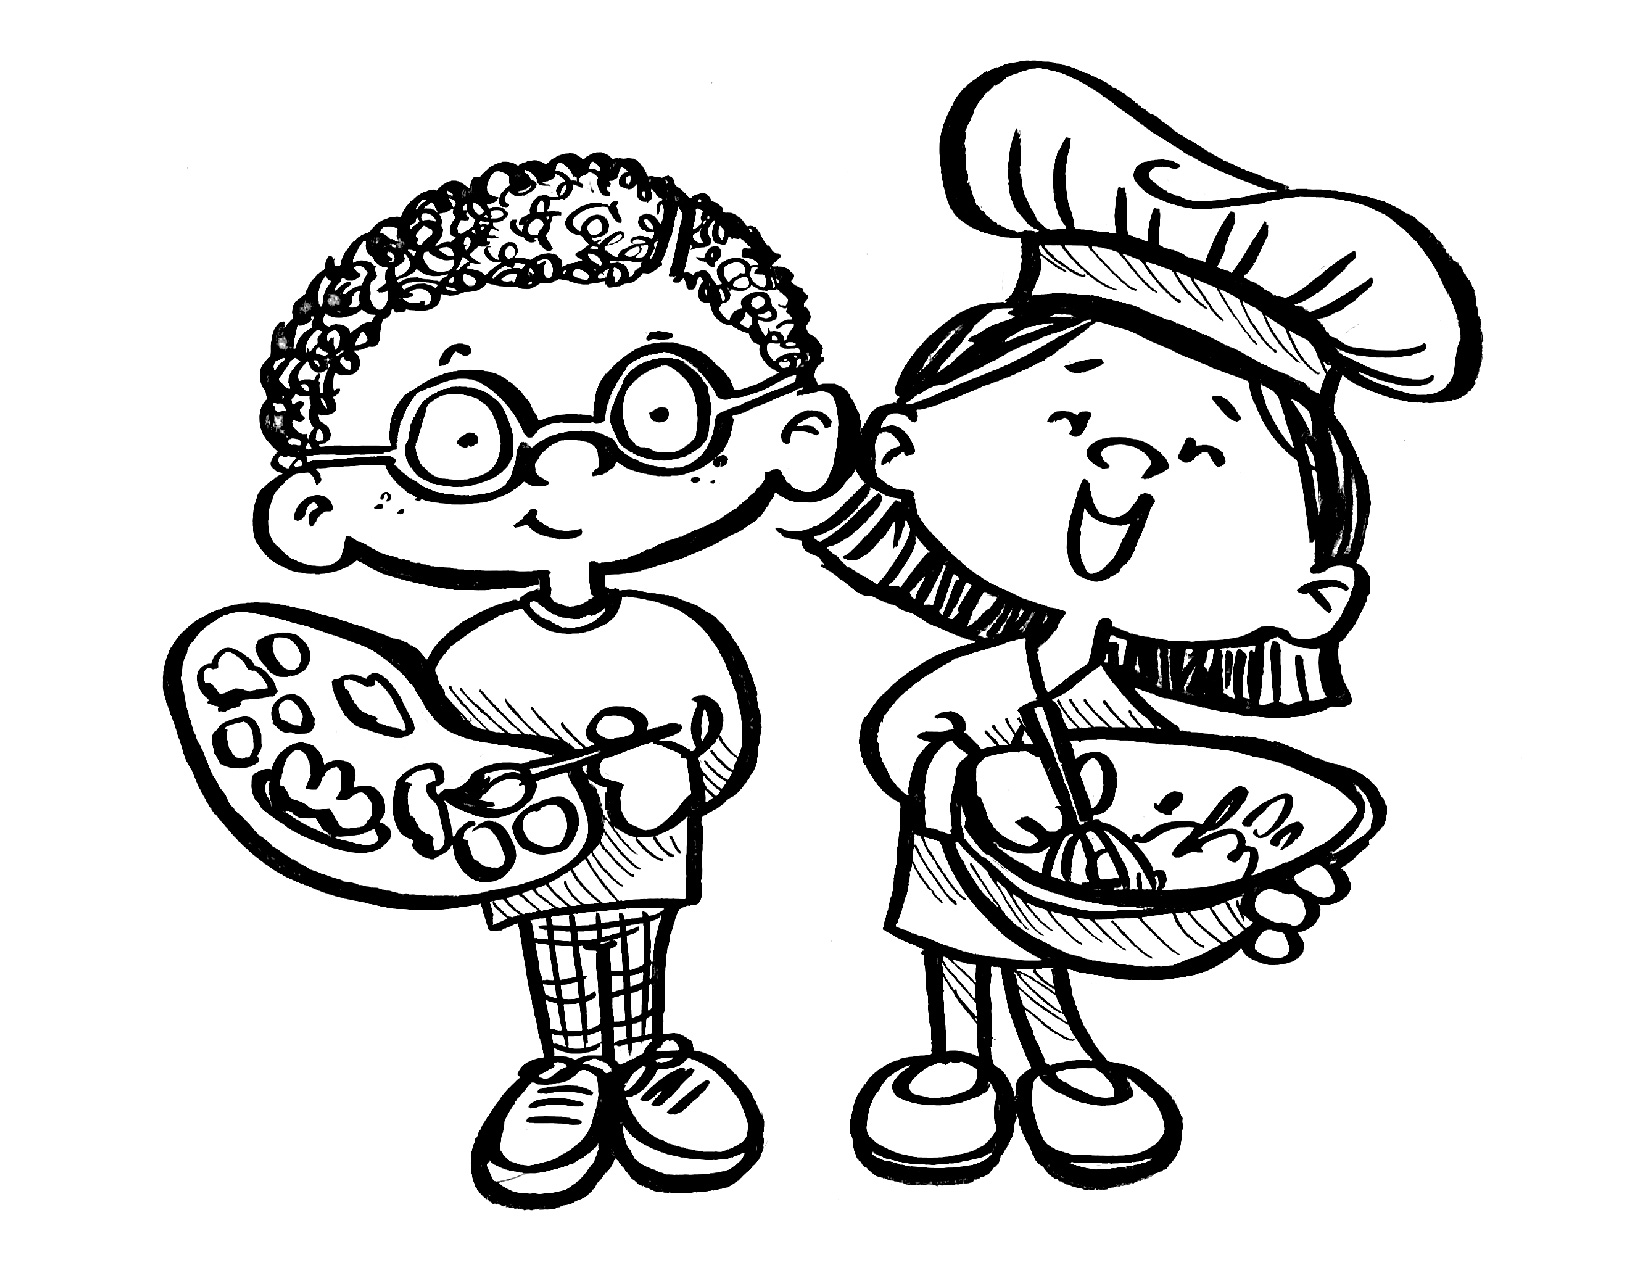 Coloring Page from The Little Book of Creativity kids painting and cooking